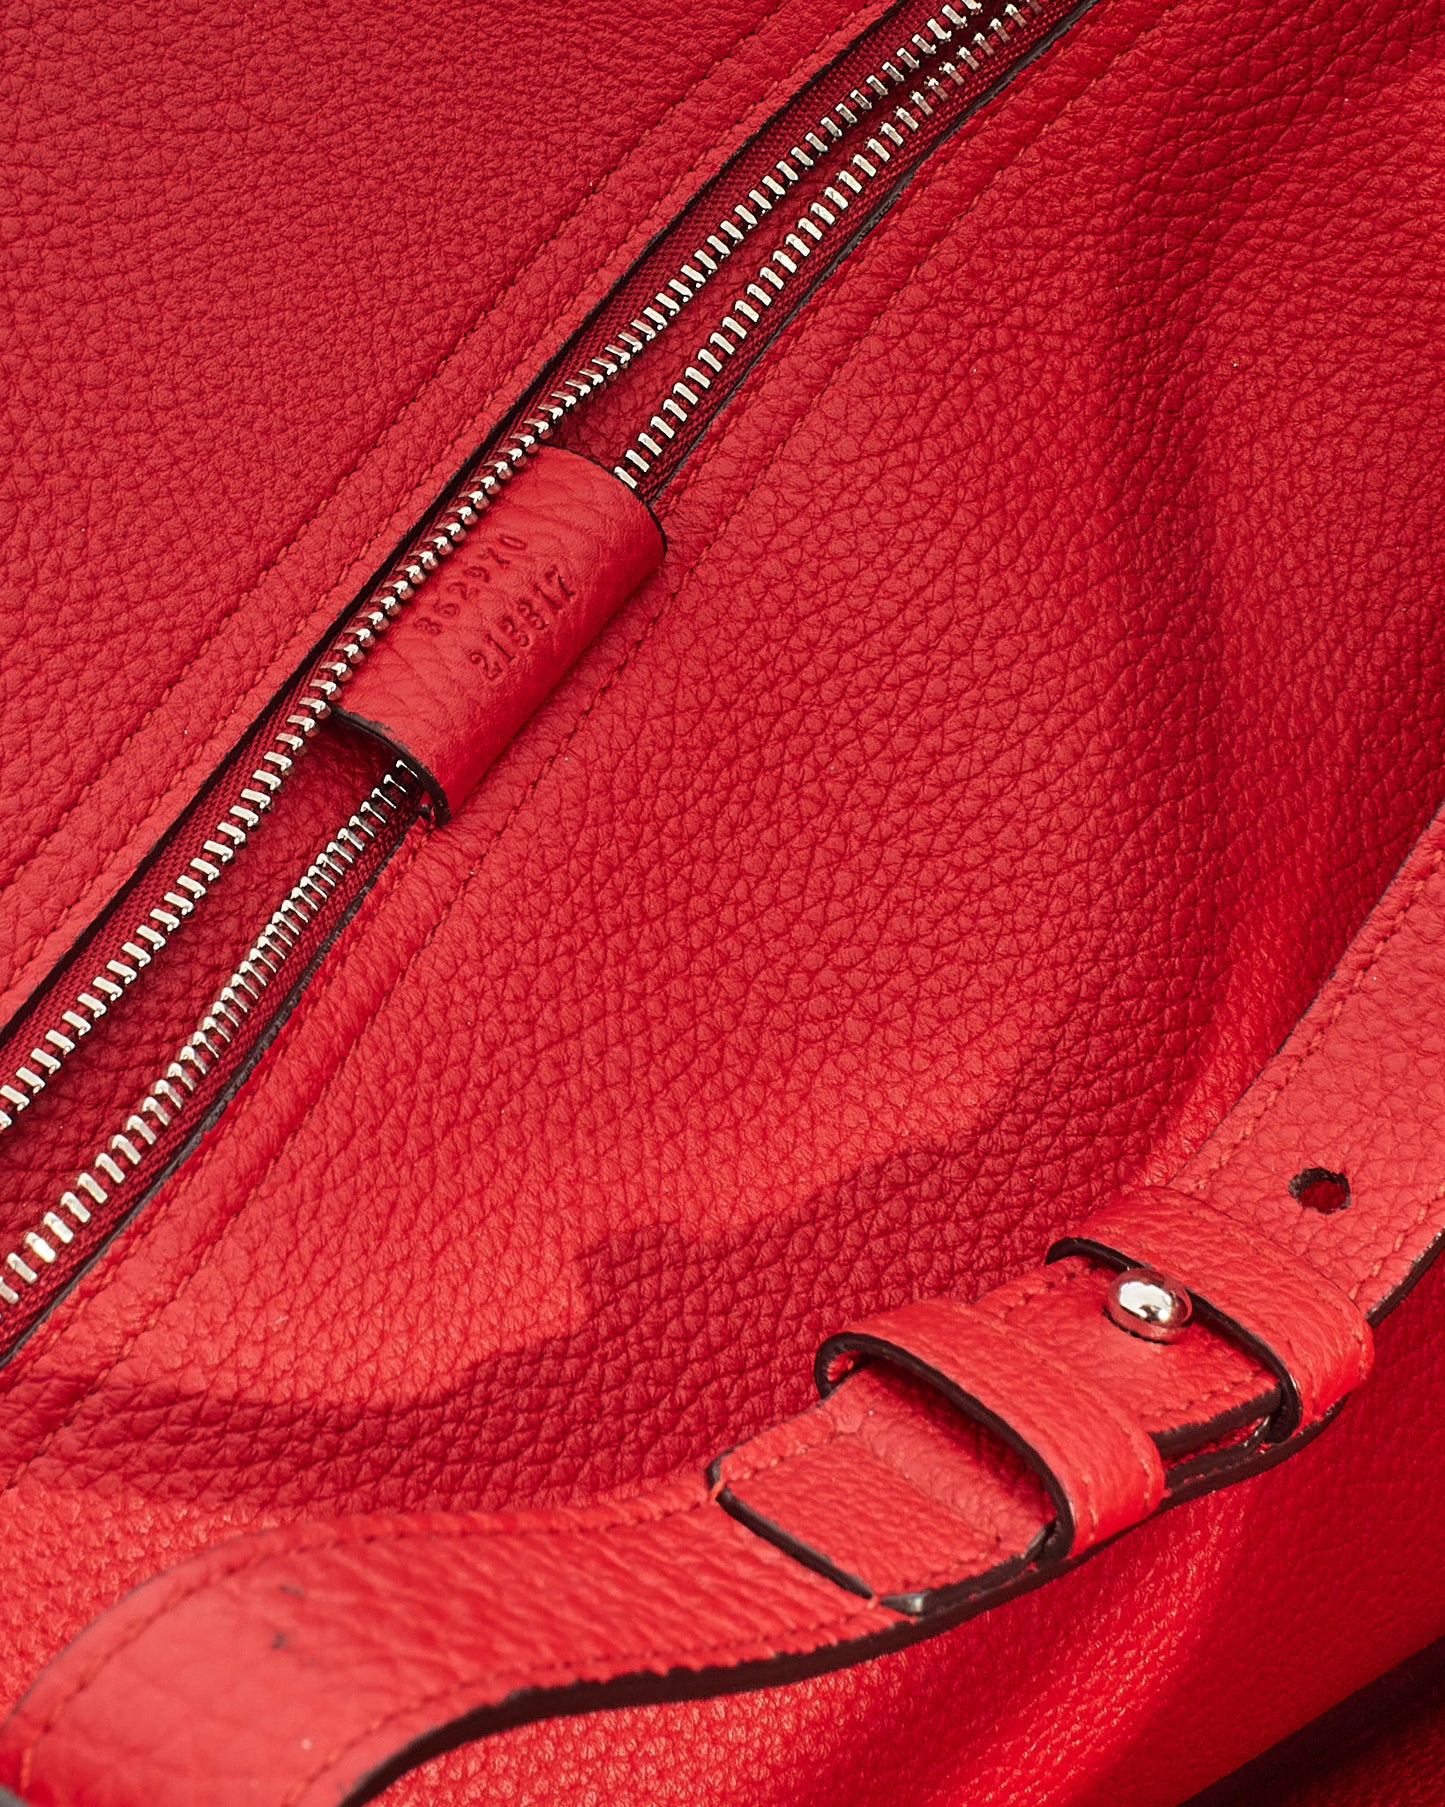 Gucci Red Pebbled Leather Jackie Large Top Handle Tote Bag